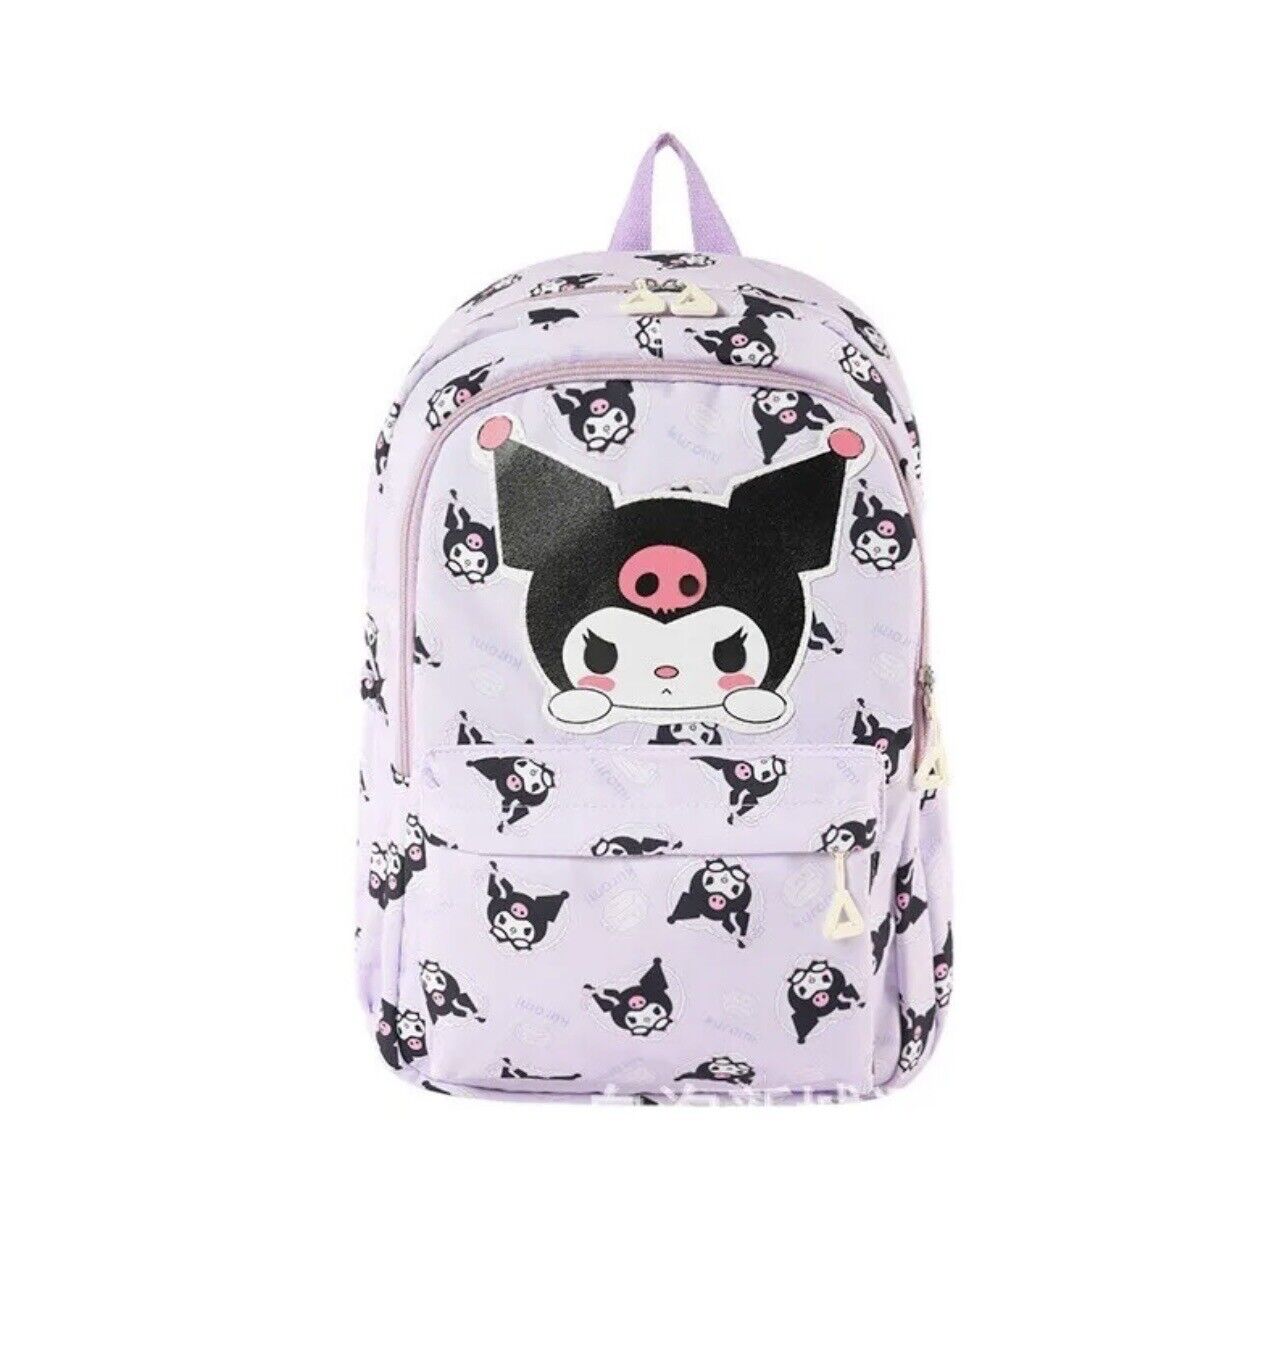 Sanrio super Cute Kuromi Backpacks with Side Pockets Large New US Seller